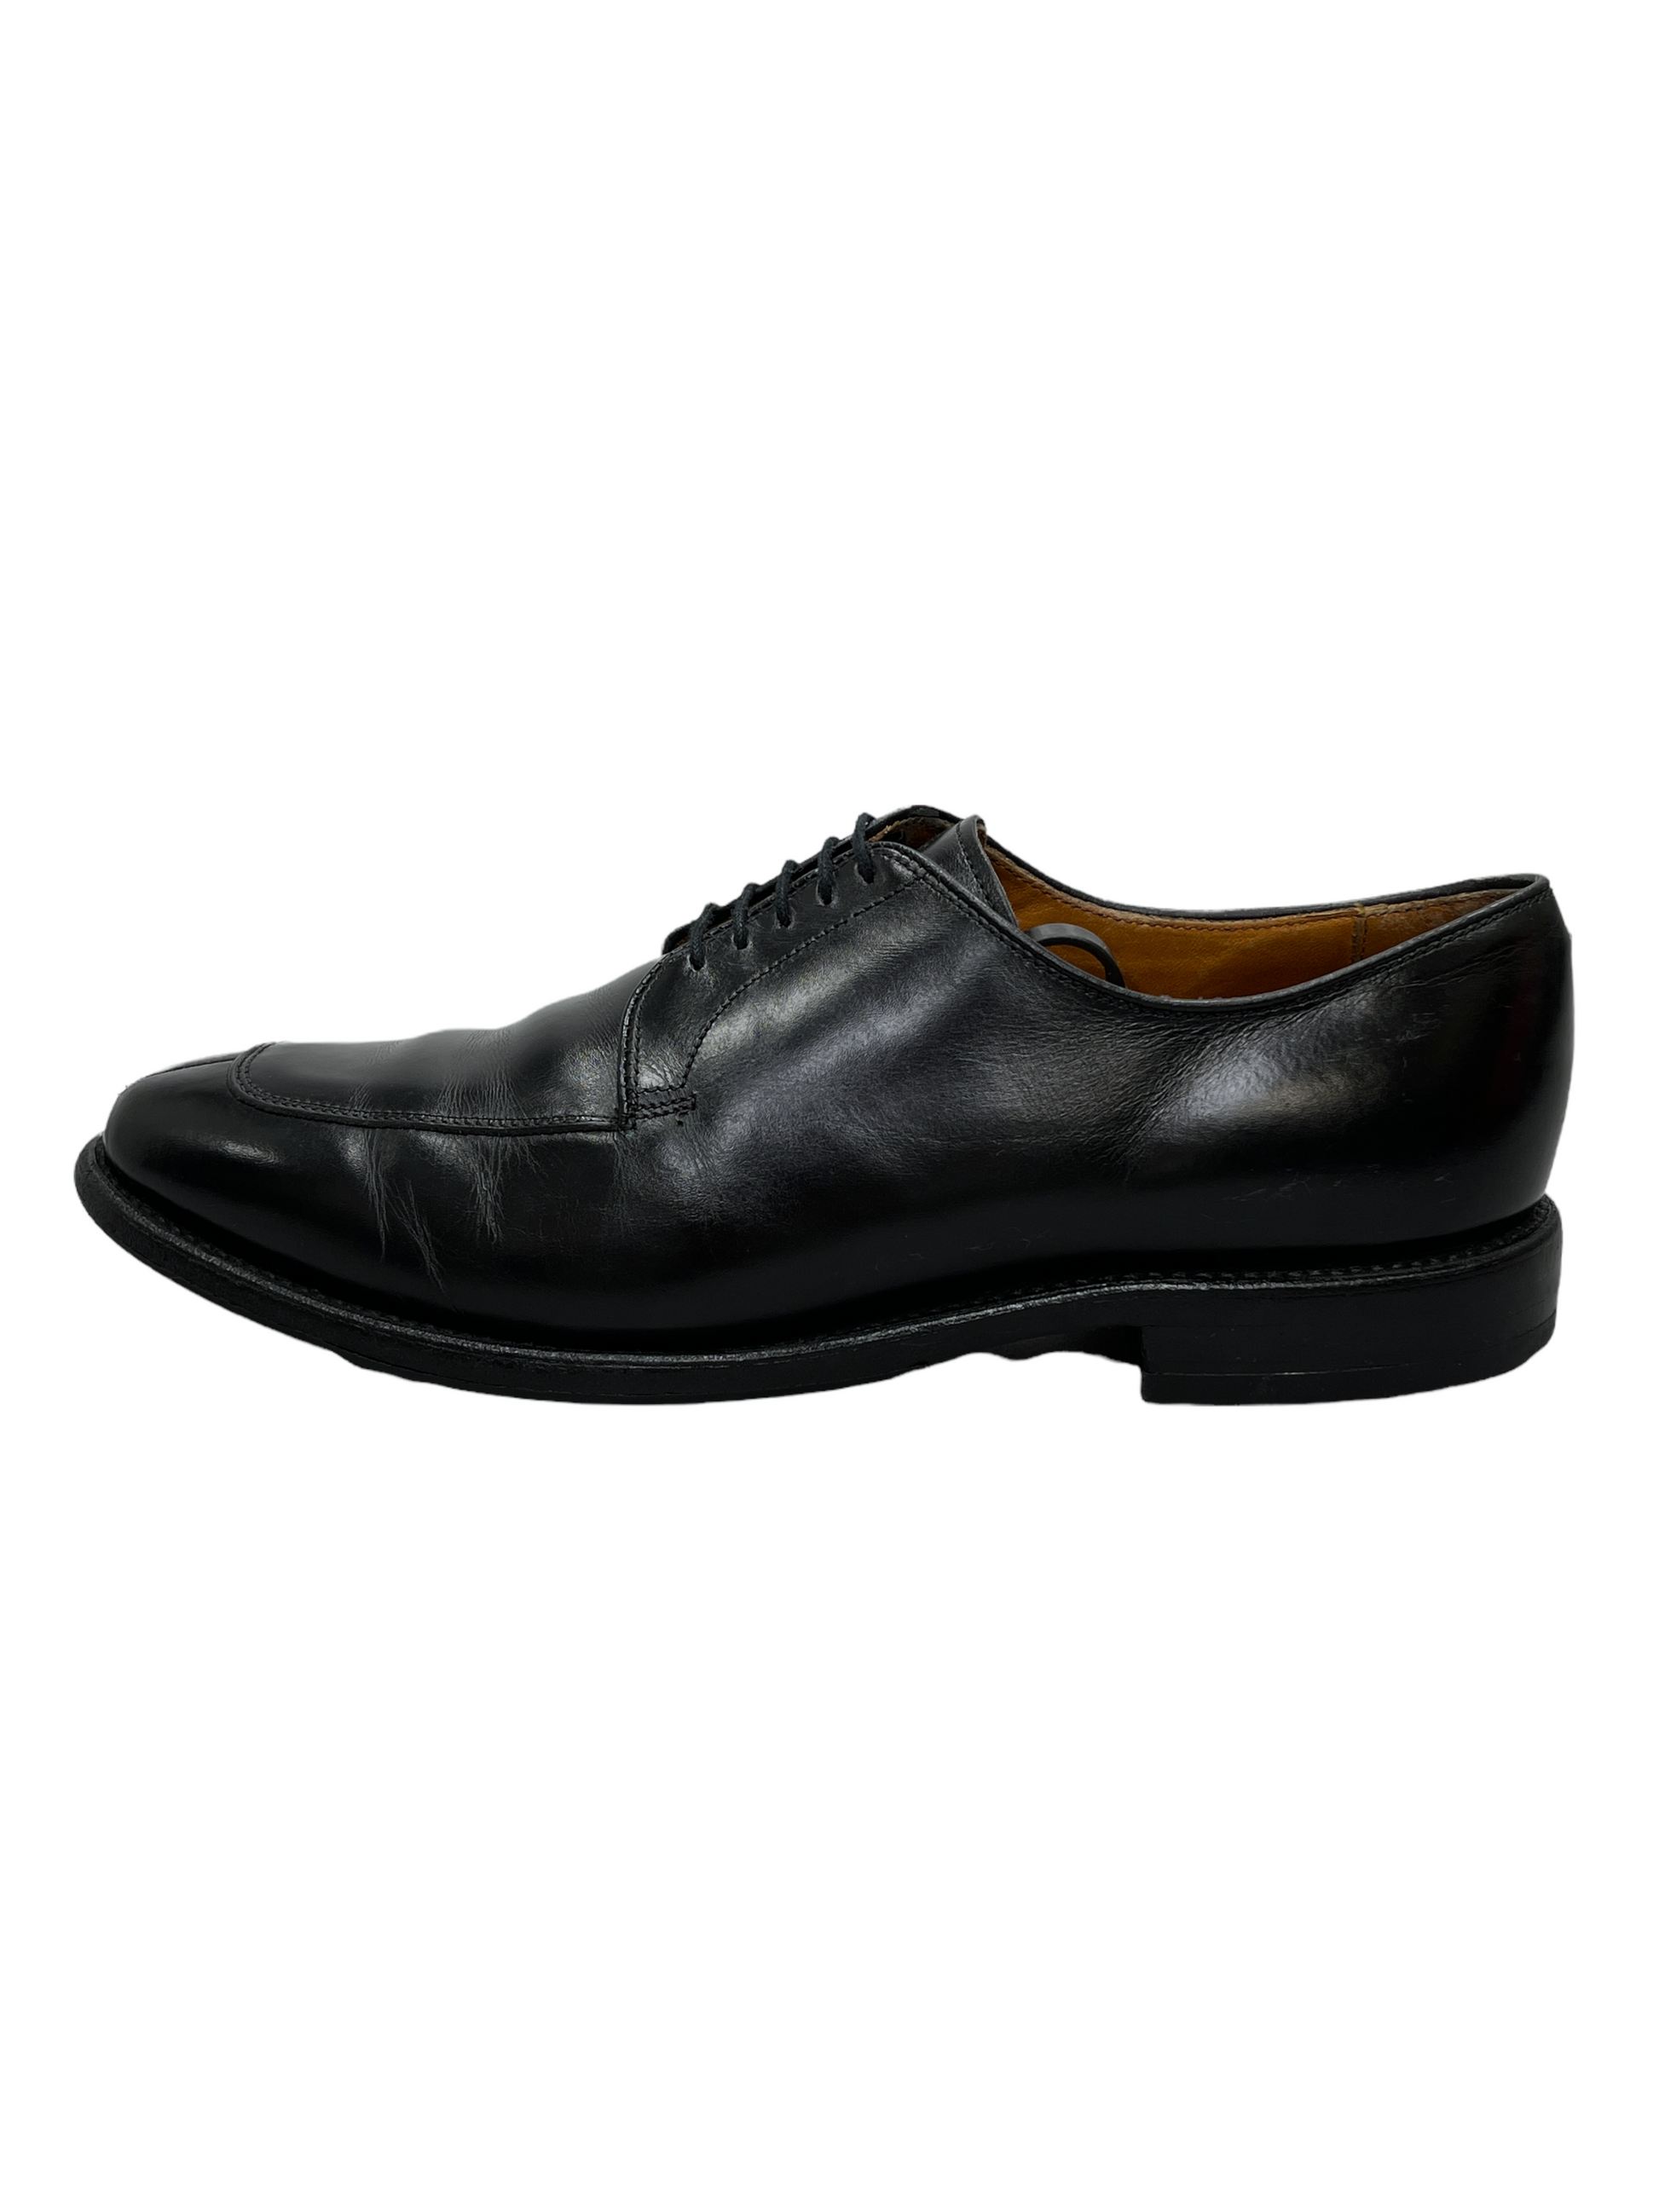 Allen Edmonds Delray Black Leather Derby Dress Shoes 8.5 D US Men — Genuine Design luxury consignment Calgary, Canada New and pre-owned clothing, shoes, accessories.